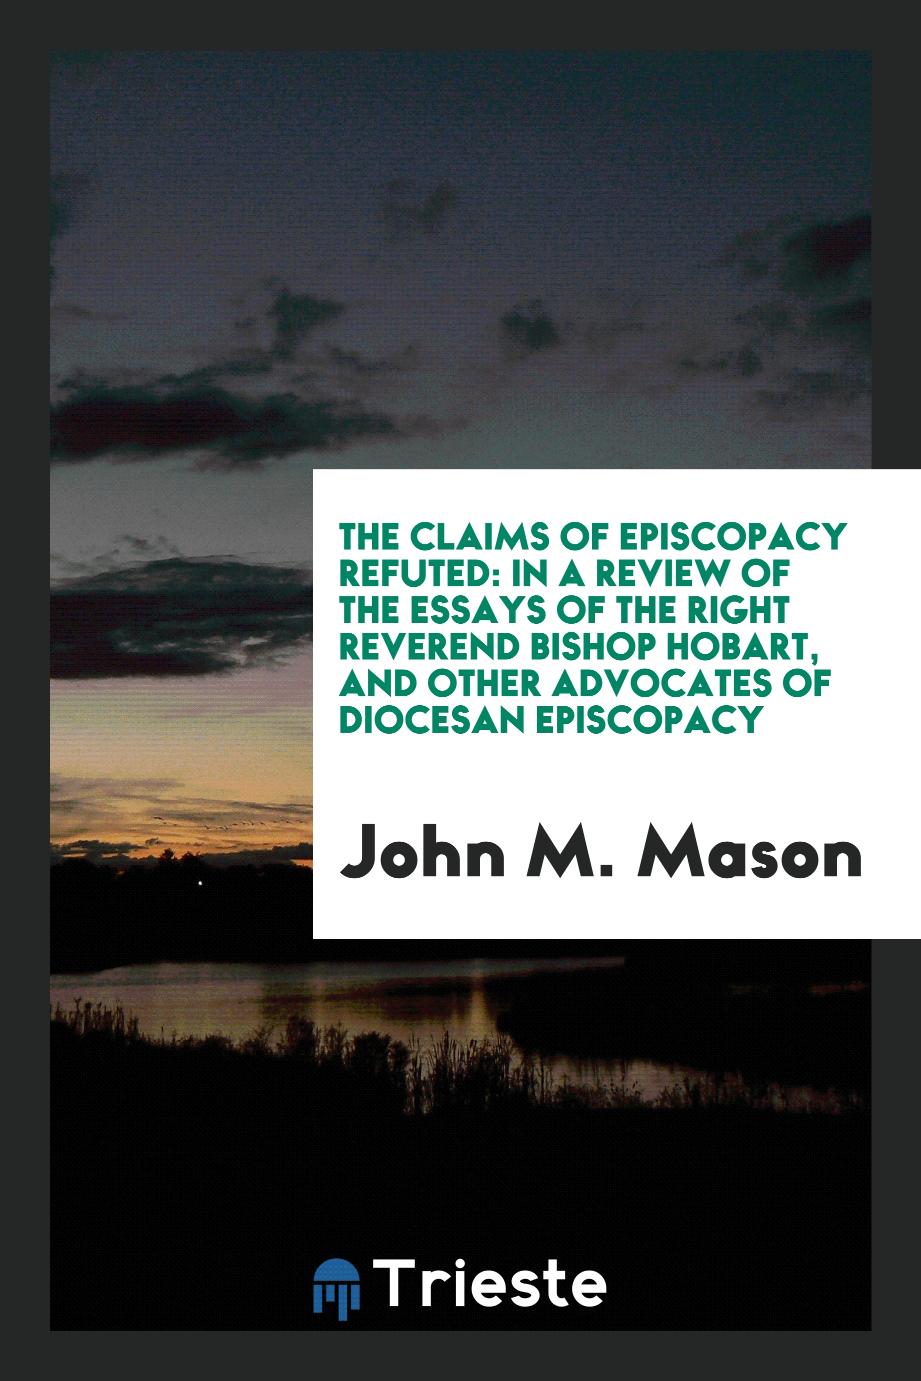 The claims of episcopacy refuted: in a review of the essays of the Right Reverend Bishop Hobart, and other advocates of diocesan episcopacy